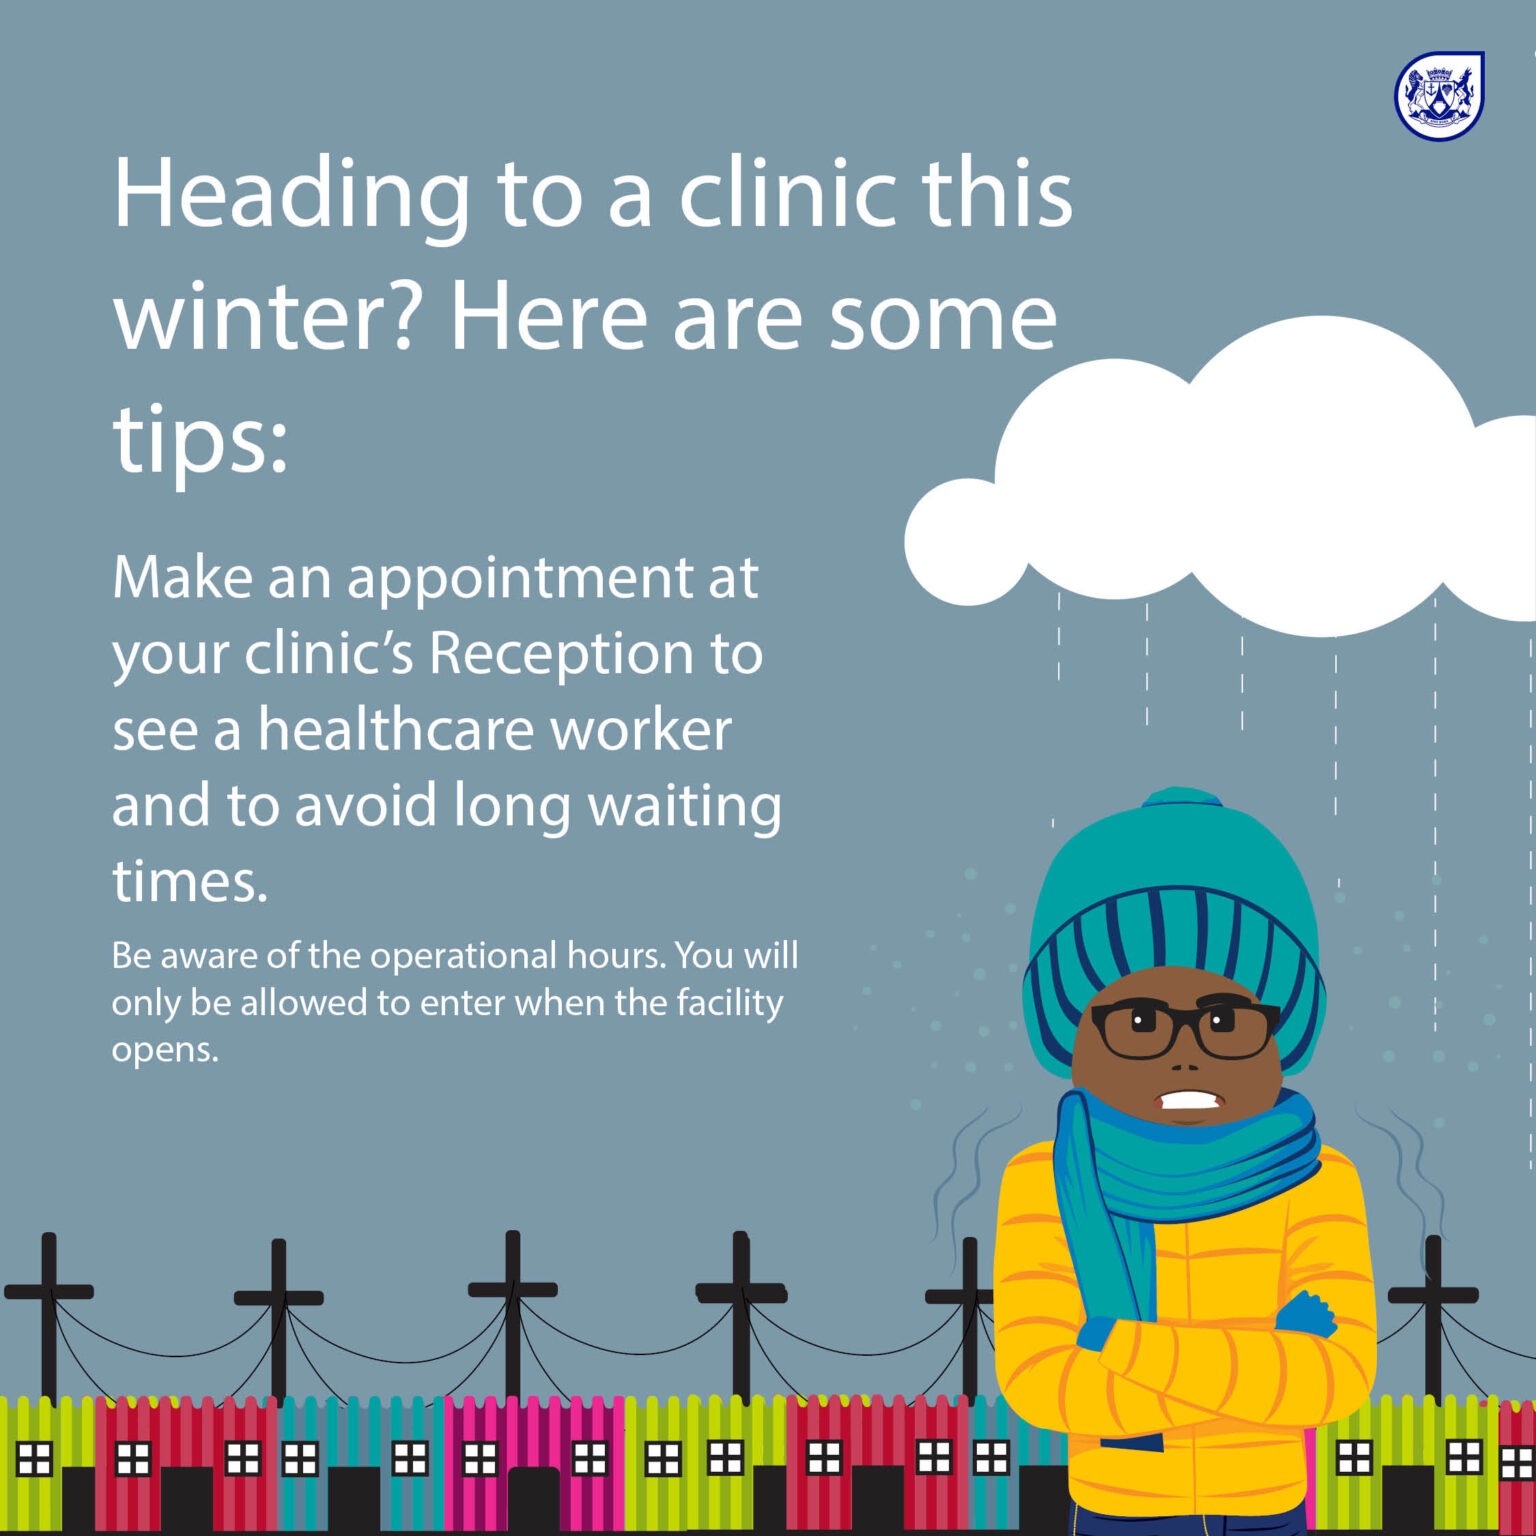 Stay healthy and safe this winter